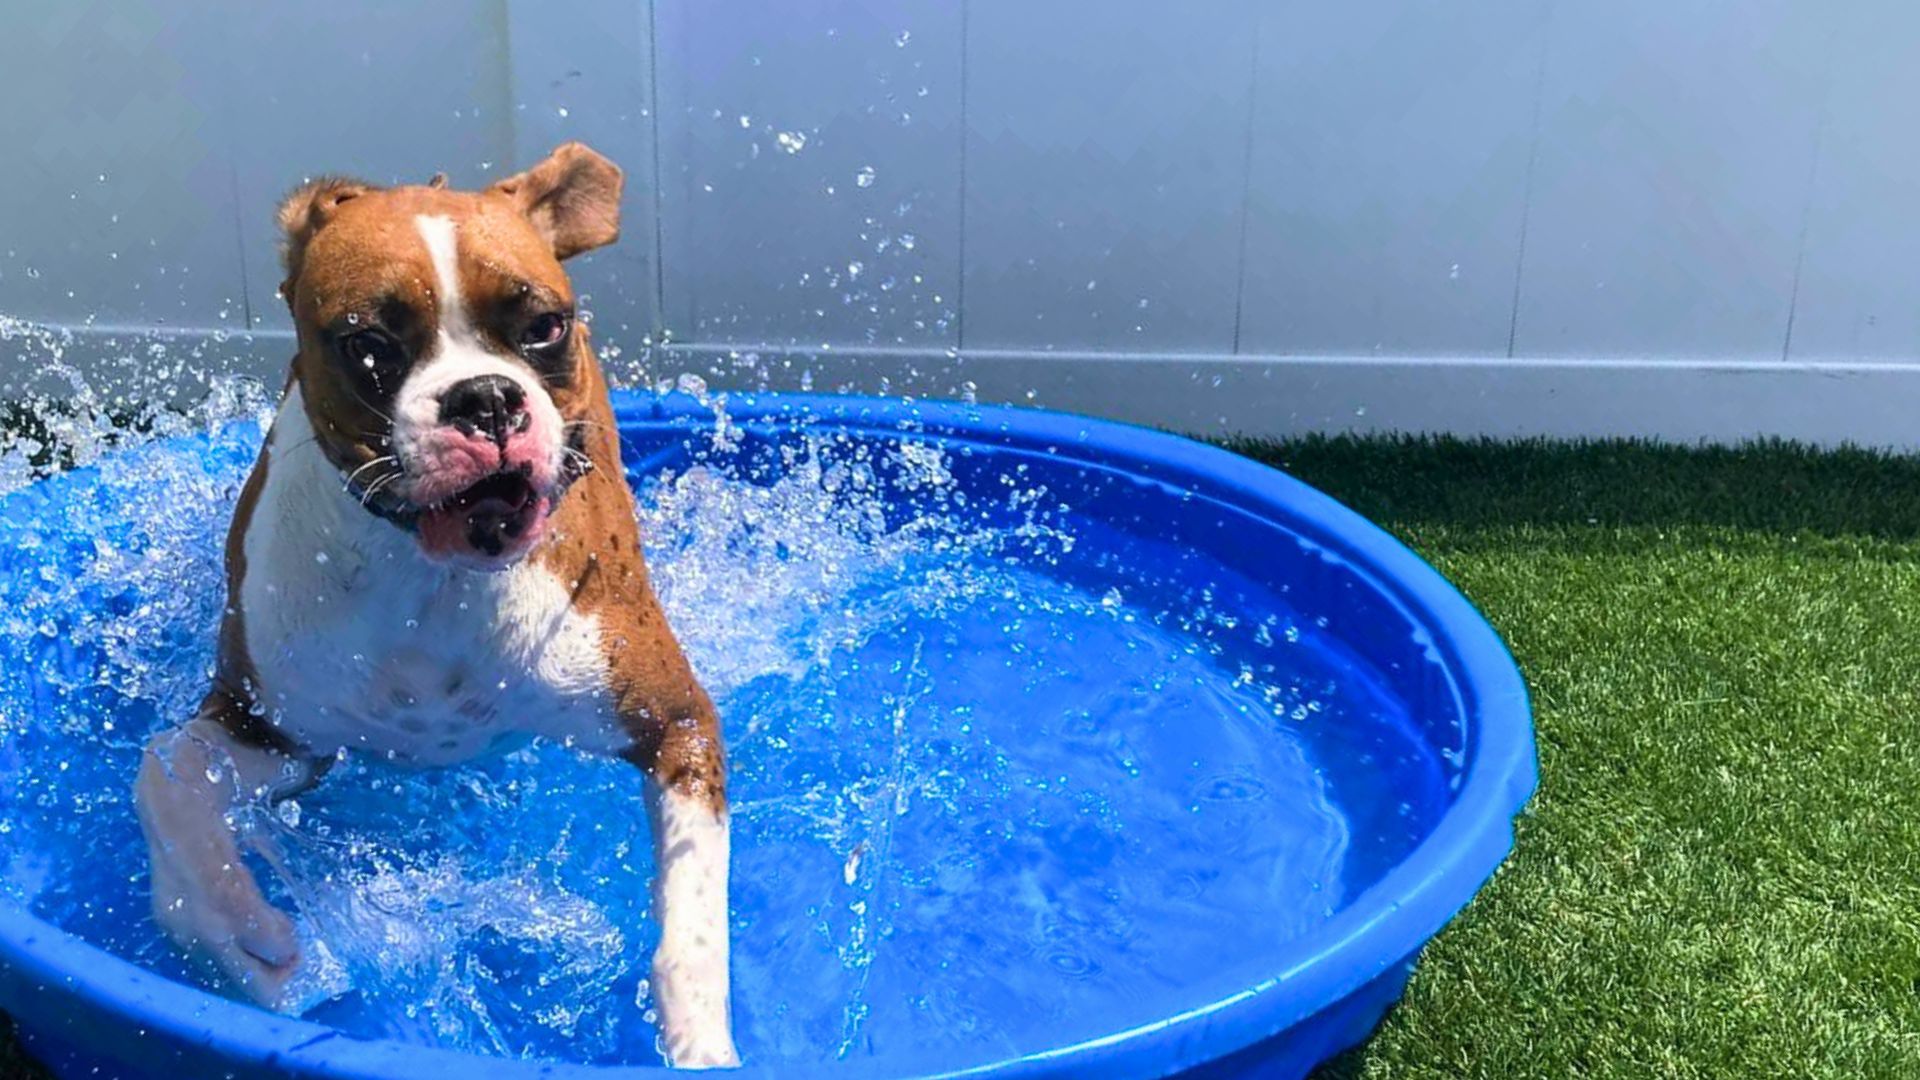 Feel the excitement of summer at our Doggy Daycare with this delightful image of a dog leaping out of a pool, creating a spectacular splash! This photo showcases one of our fun little swimming pools, designed specifically for dogs to stay cool and have a blast during the hot summer days. It’s a perfect addition to our doggy daycare and pet boarding services, ensuring a safe and enjoyable outdoor play experience.